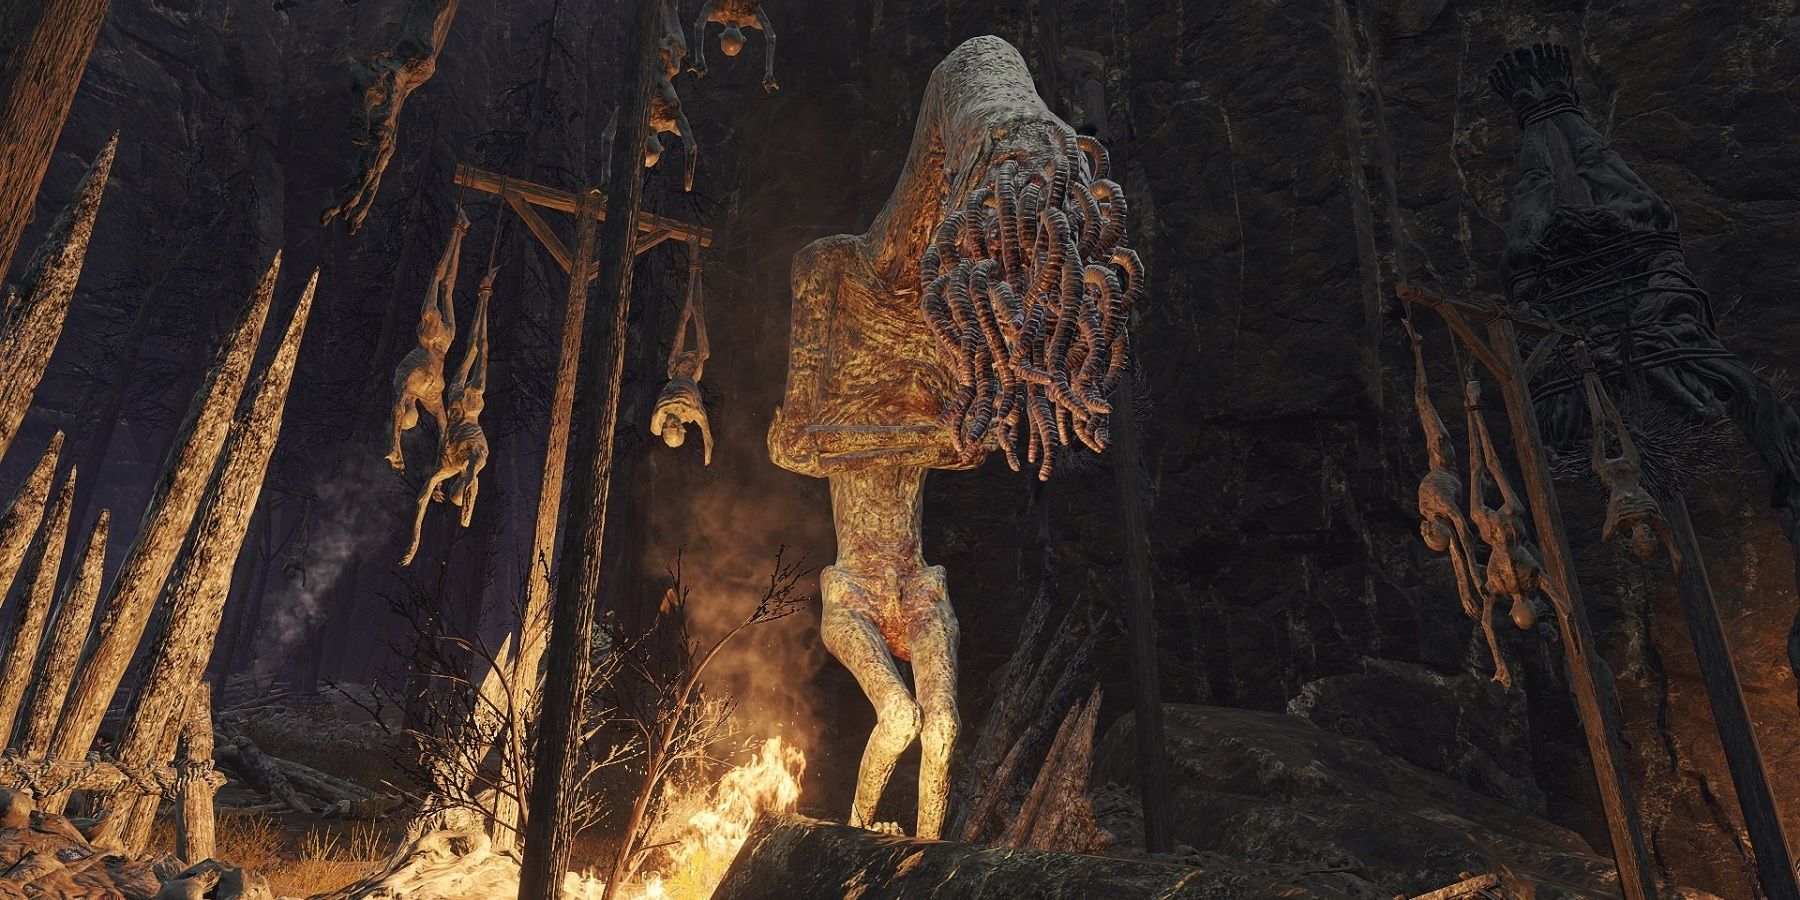 Elden Ring Lesser Wormface stands next to hanging corpses and fire.